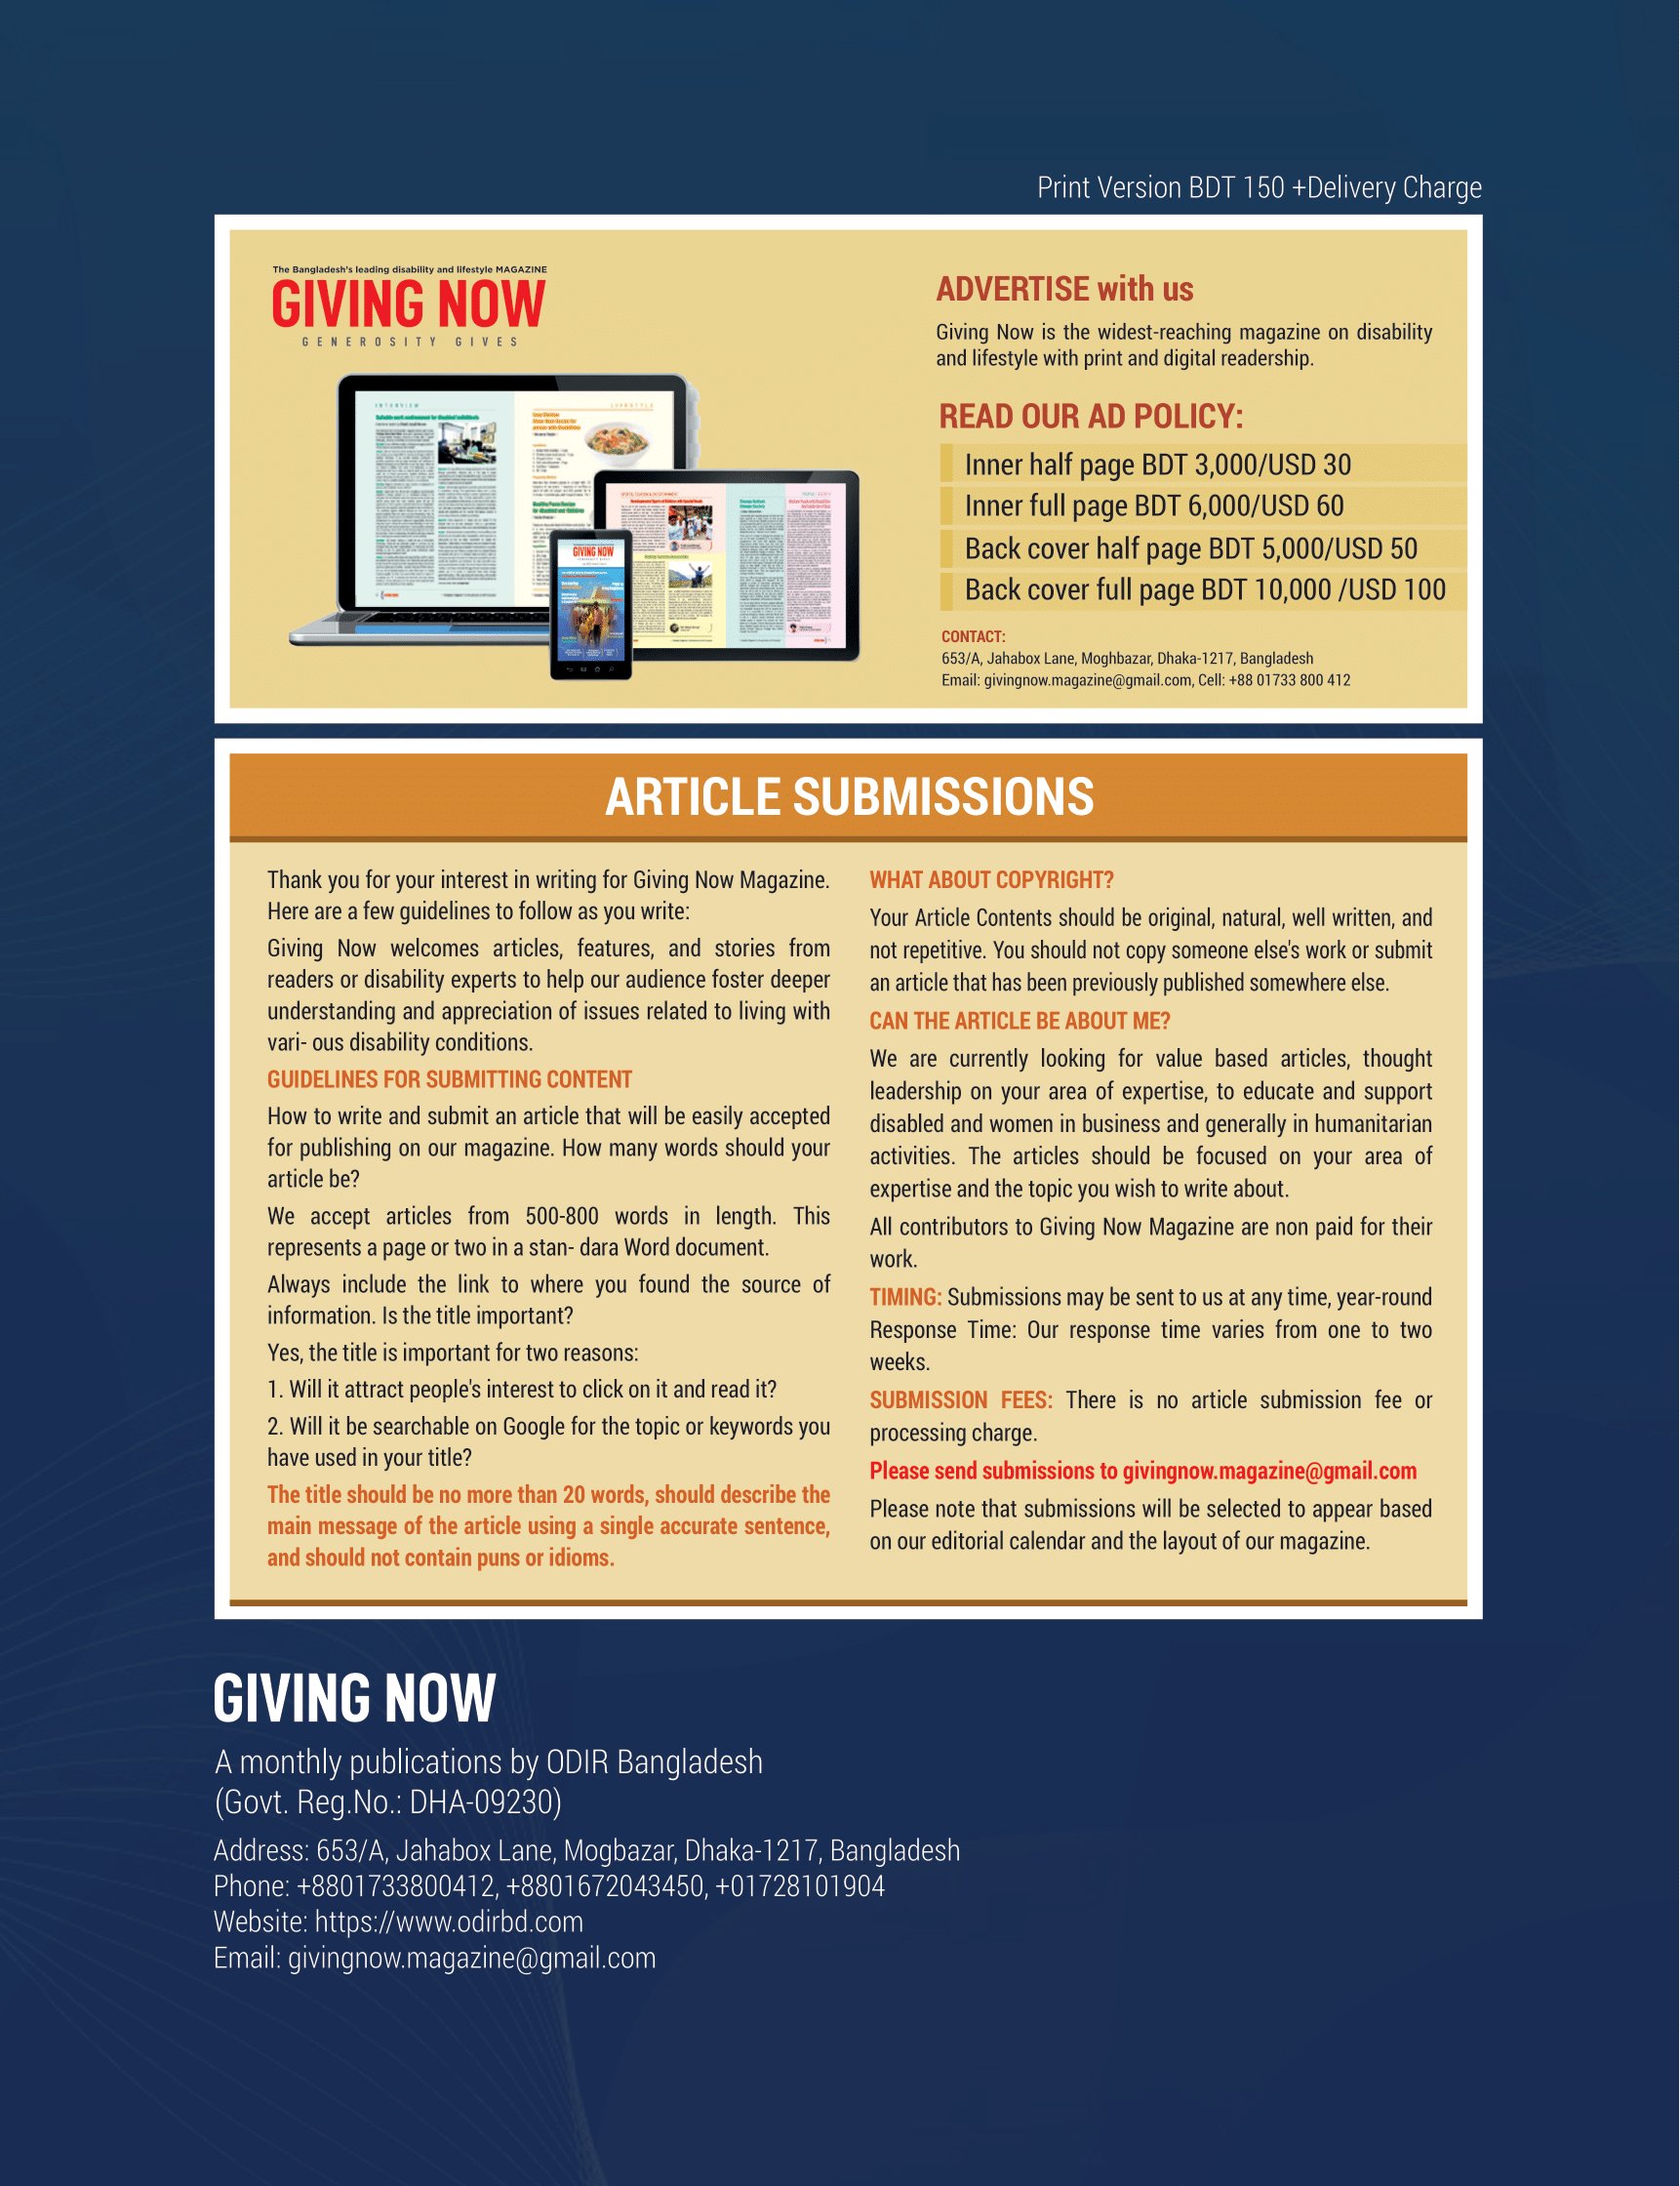 Read Our AD Policy or Rules of Article Submissions